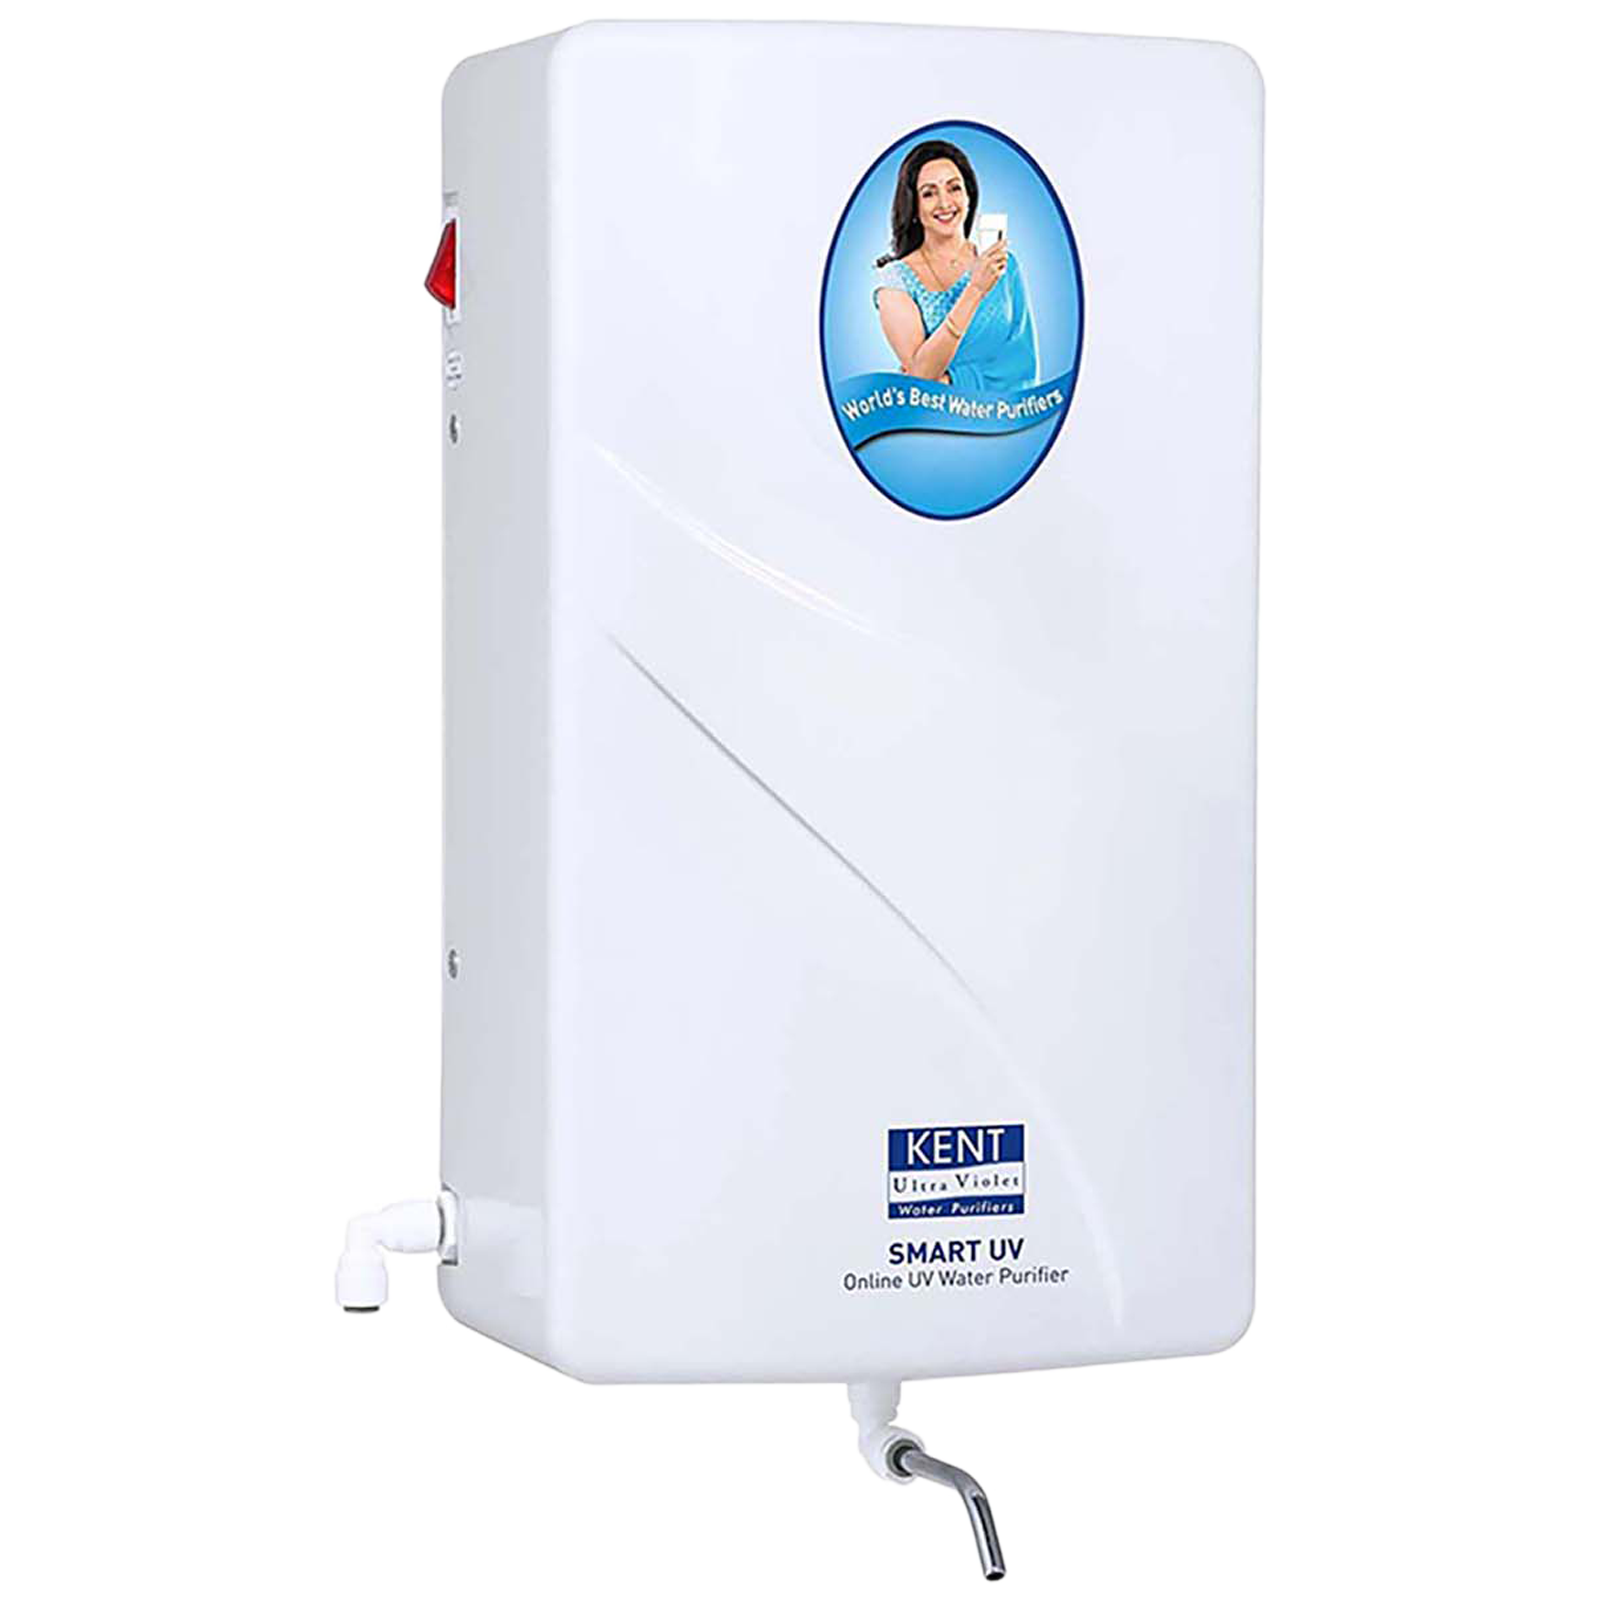 Kent Smart UV Electrical Water Purifier (Compact Design, 11138, White)_1